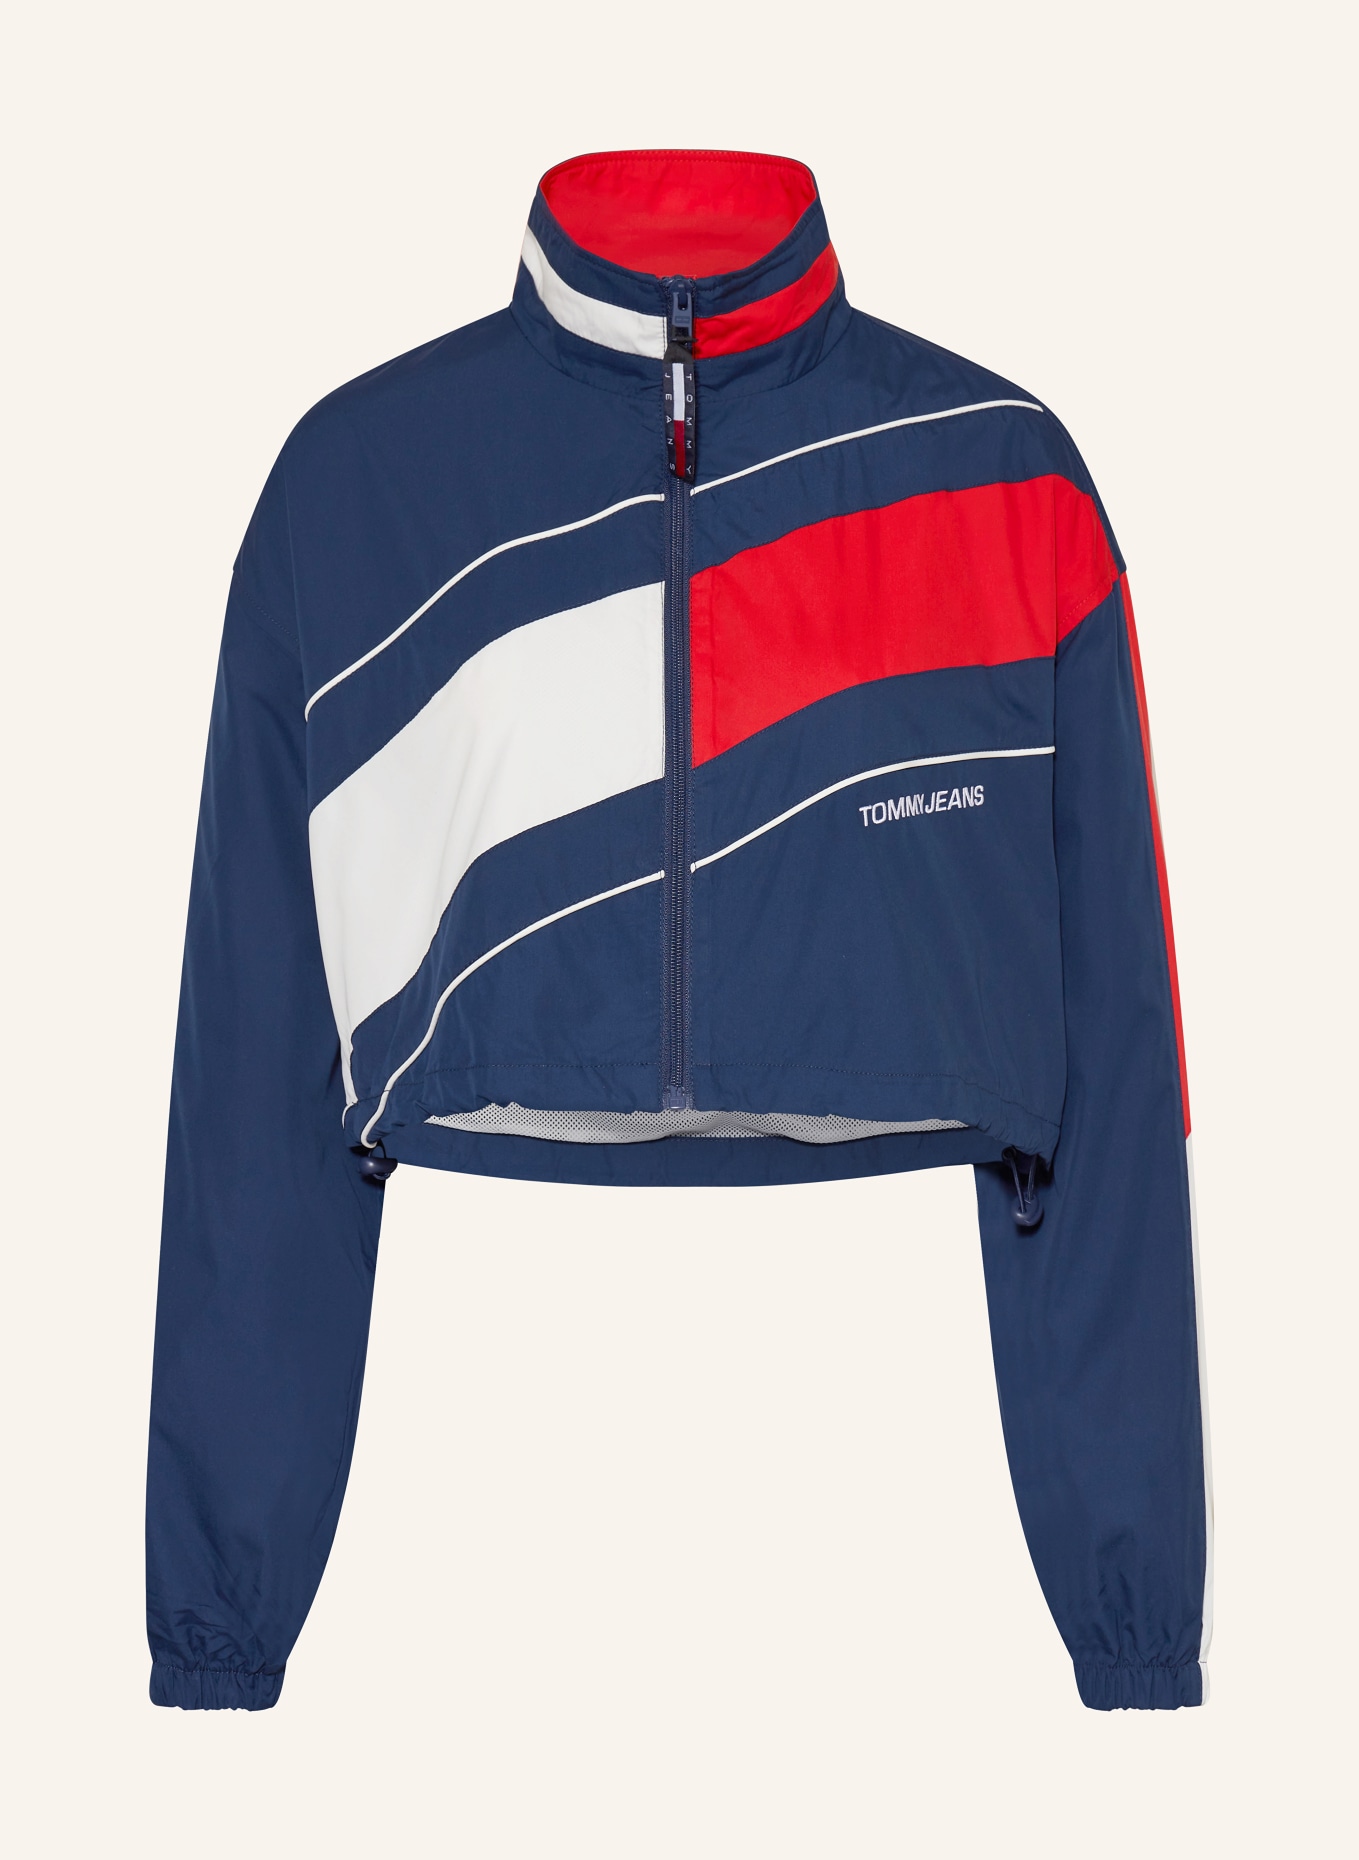 TOMMY JEANS Training jacket, Color: DARK BLUE/ RED/ WHITE (Image 1)